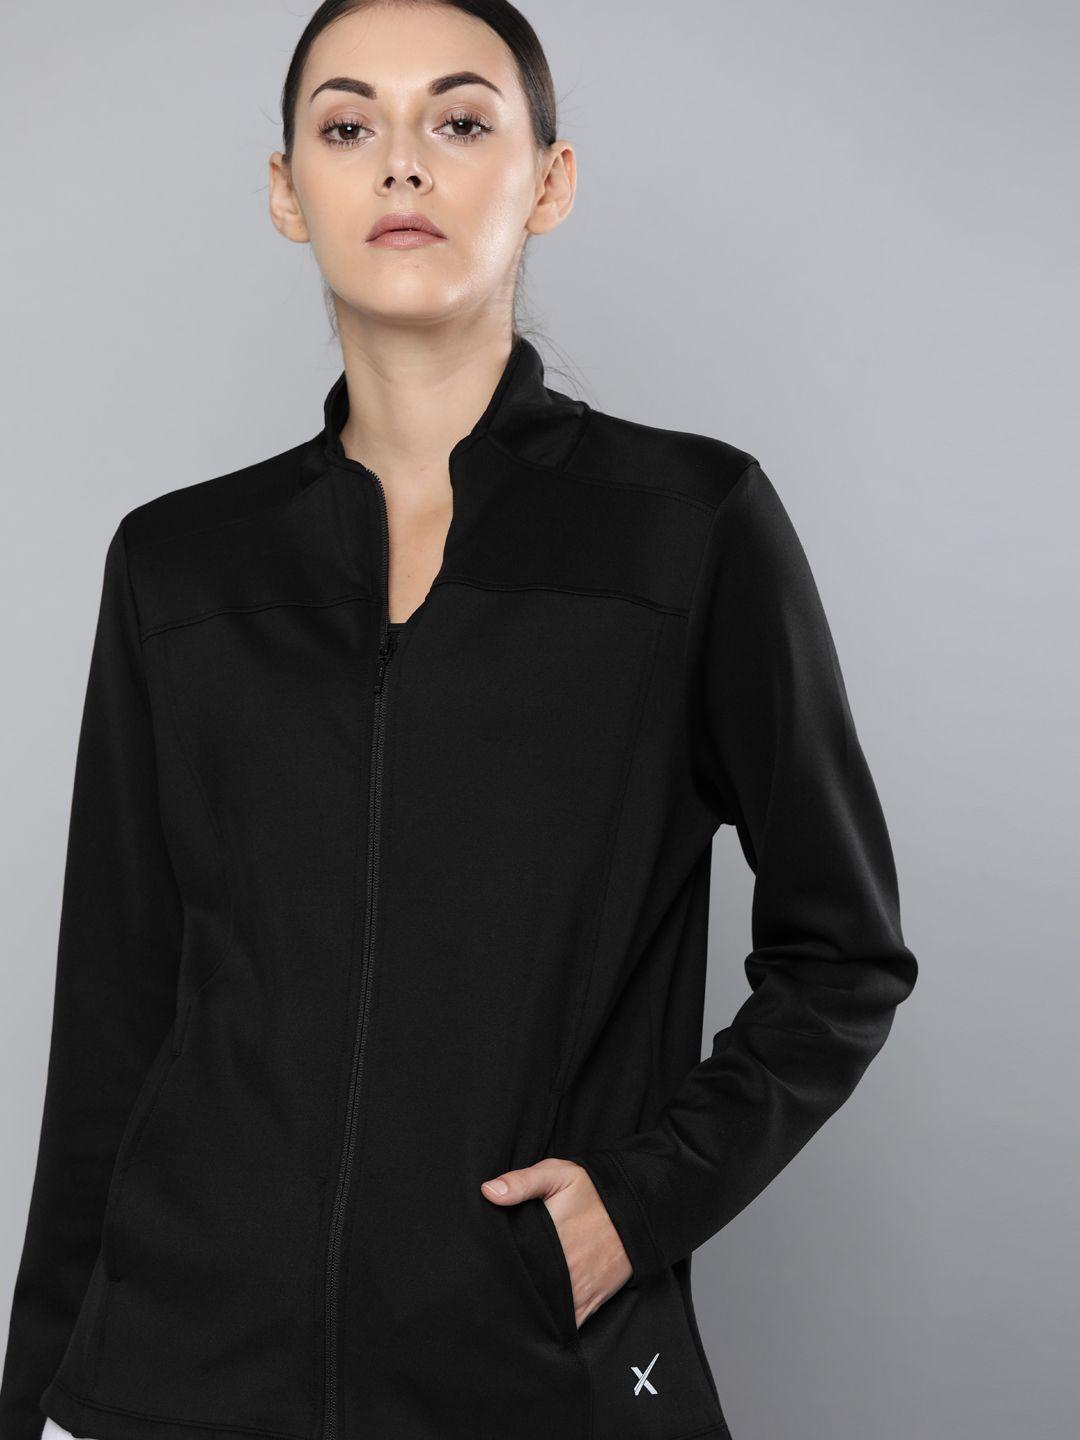 hrx by hrithik roshan women jet black solid rapid-dry antimicrobial running jacket